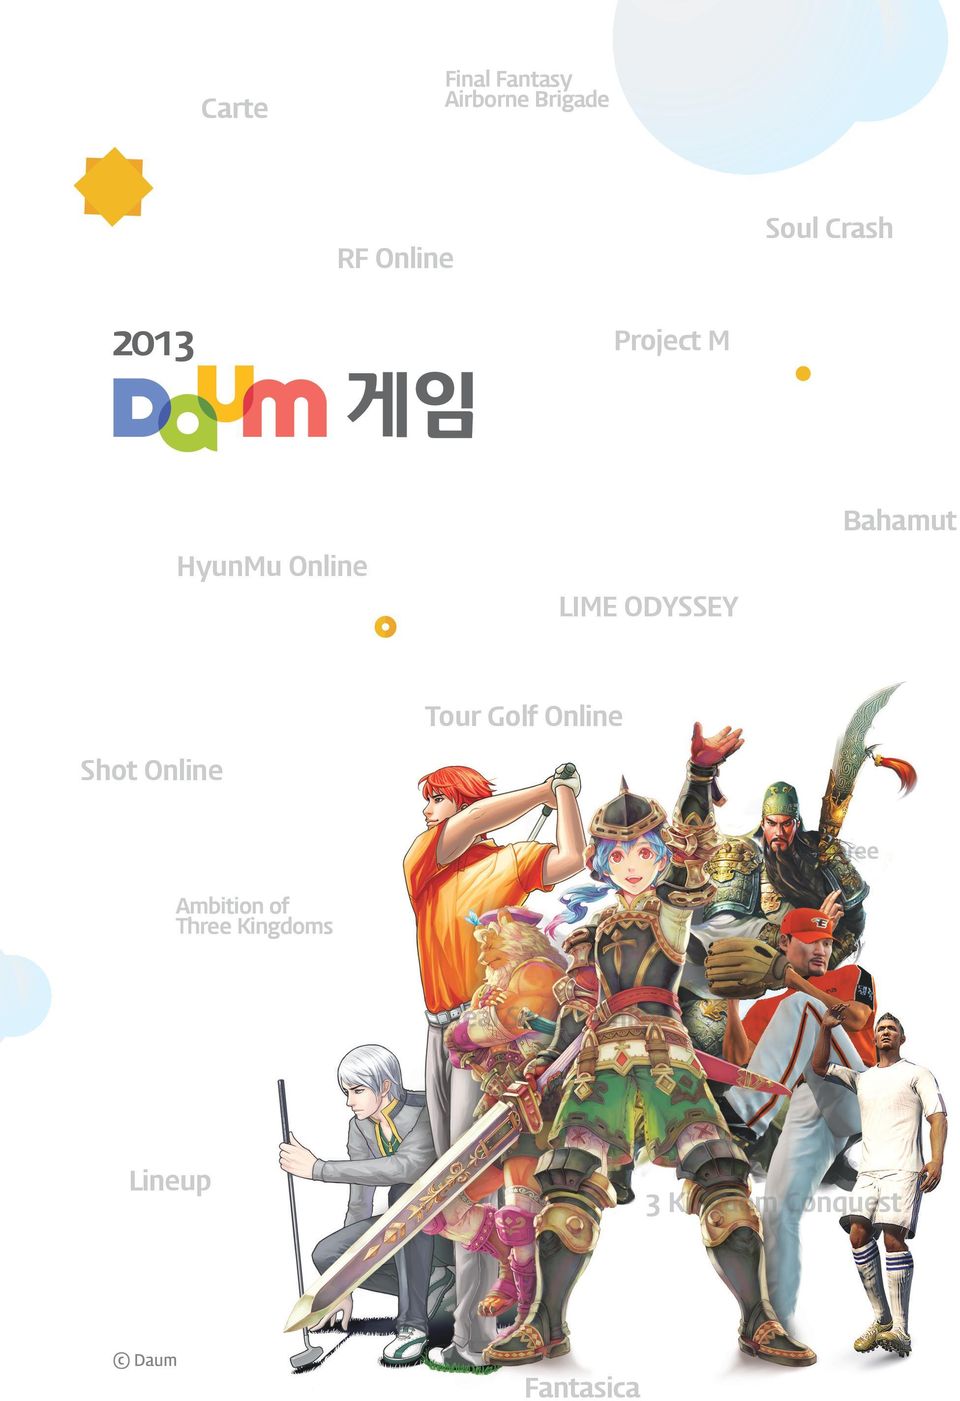 Online Shot Online Chaos of Three Kingdoms Ambition of